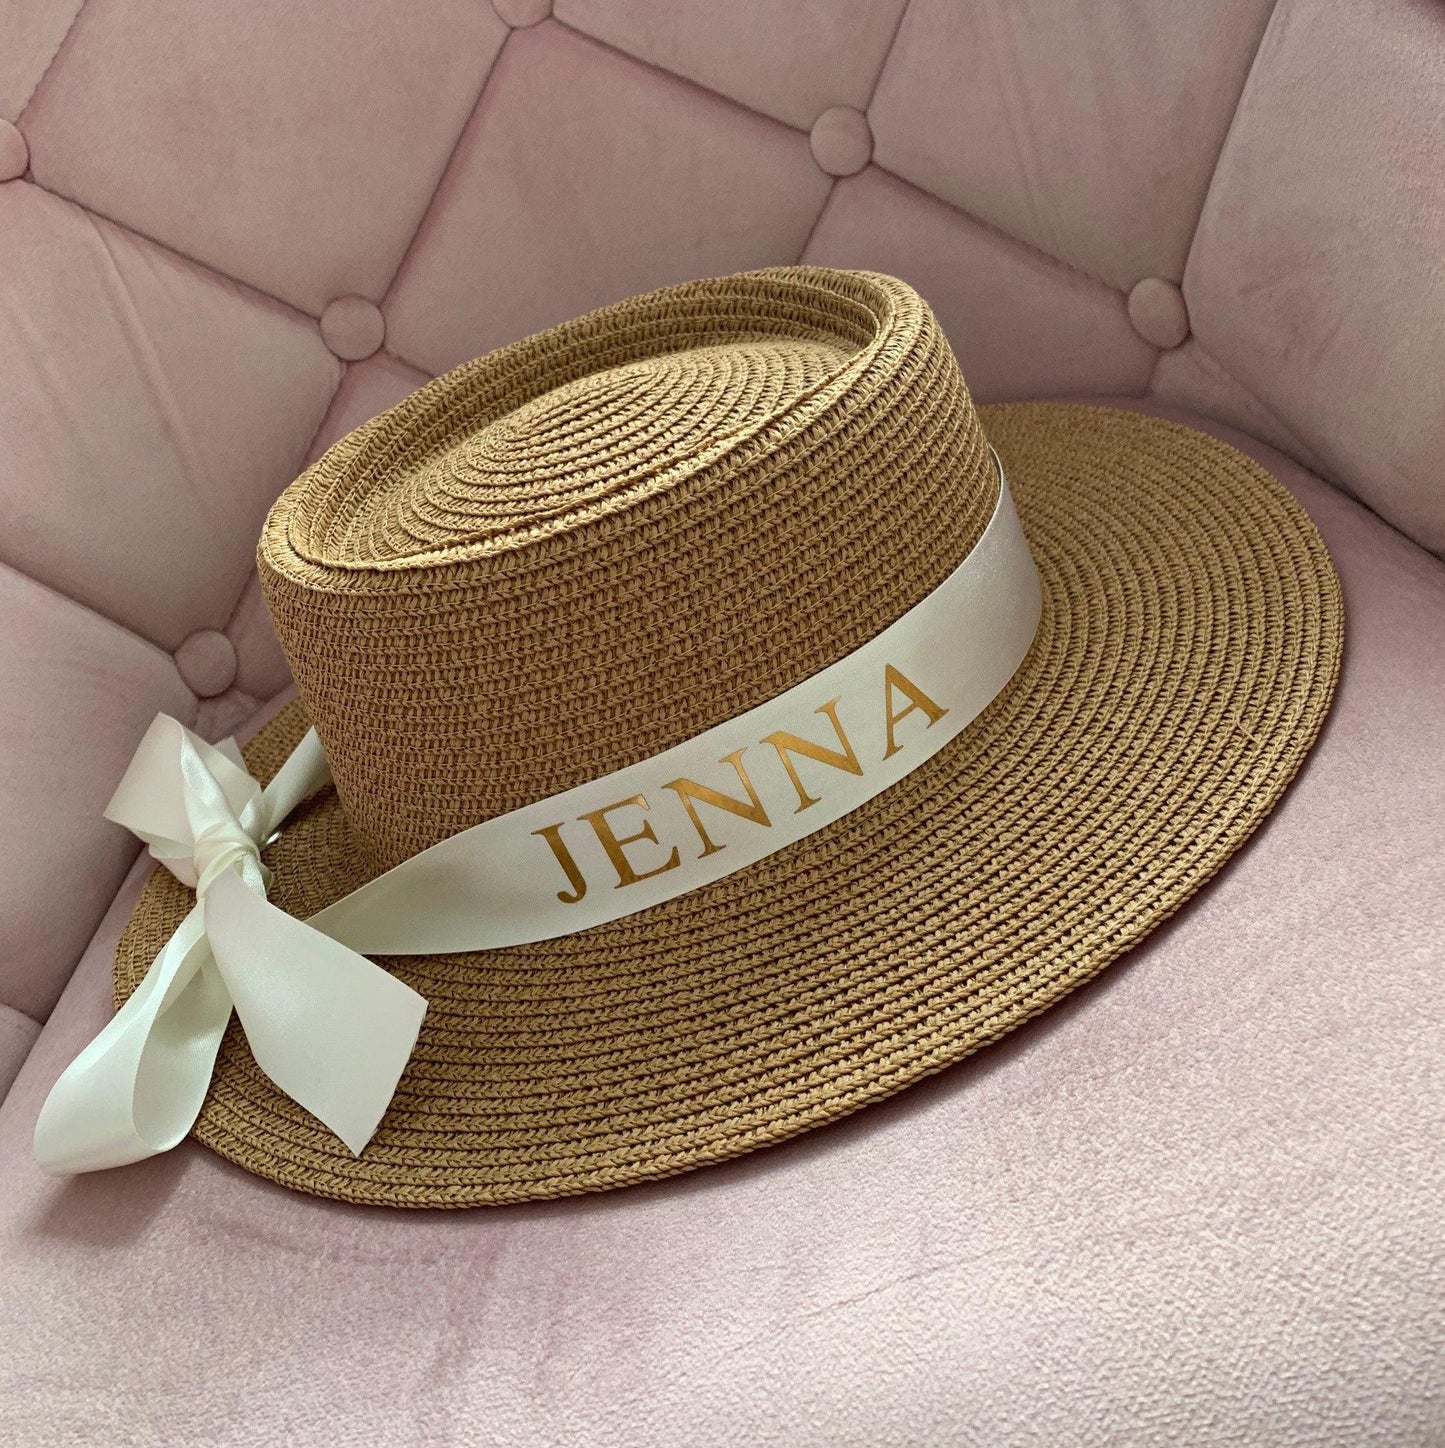 Personalised straw beach hat with name or initials in gold lettering